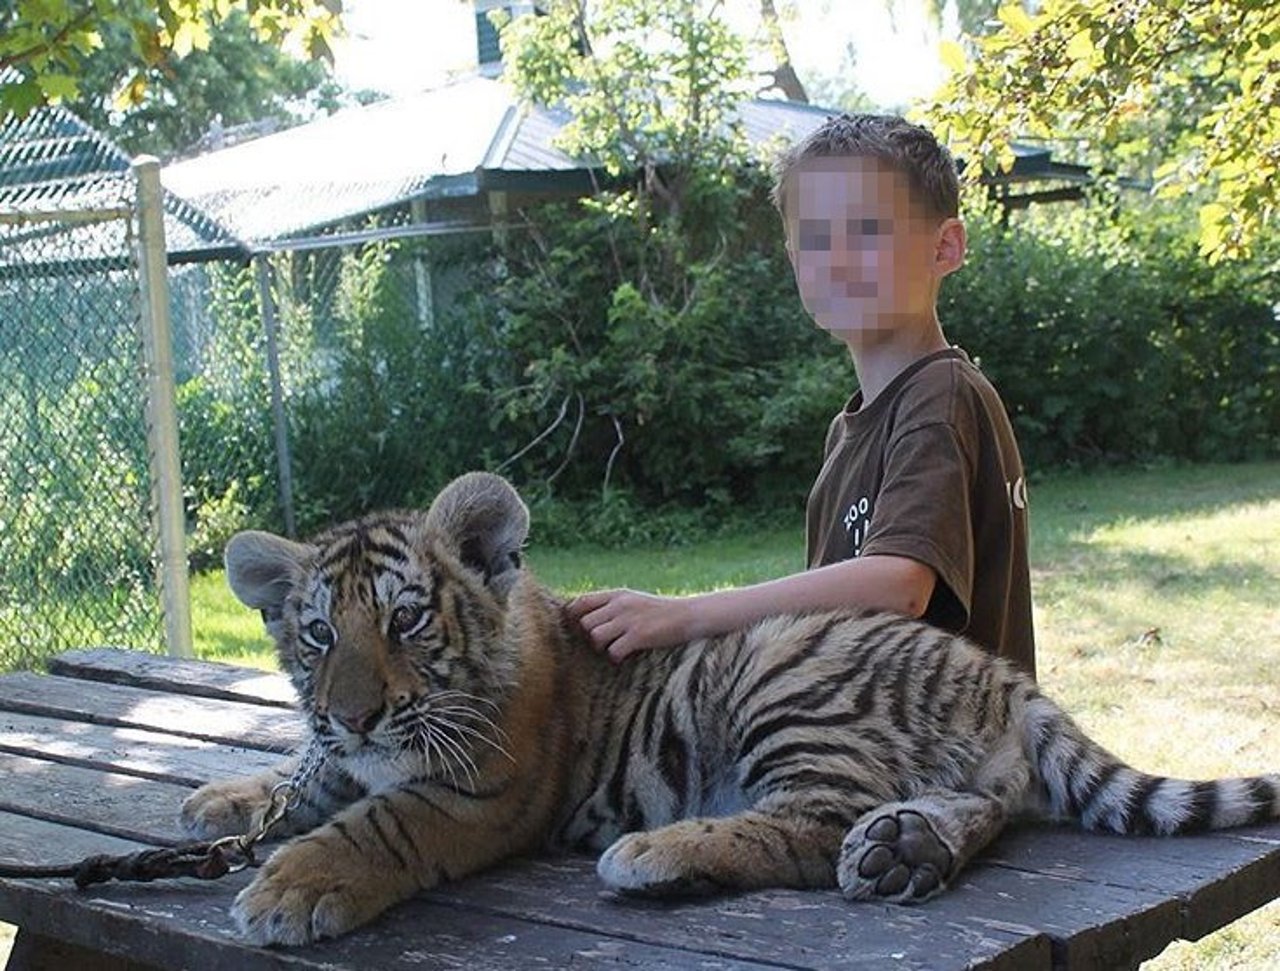 A young boy posing with a tiger at Jungle Cat World in Canada